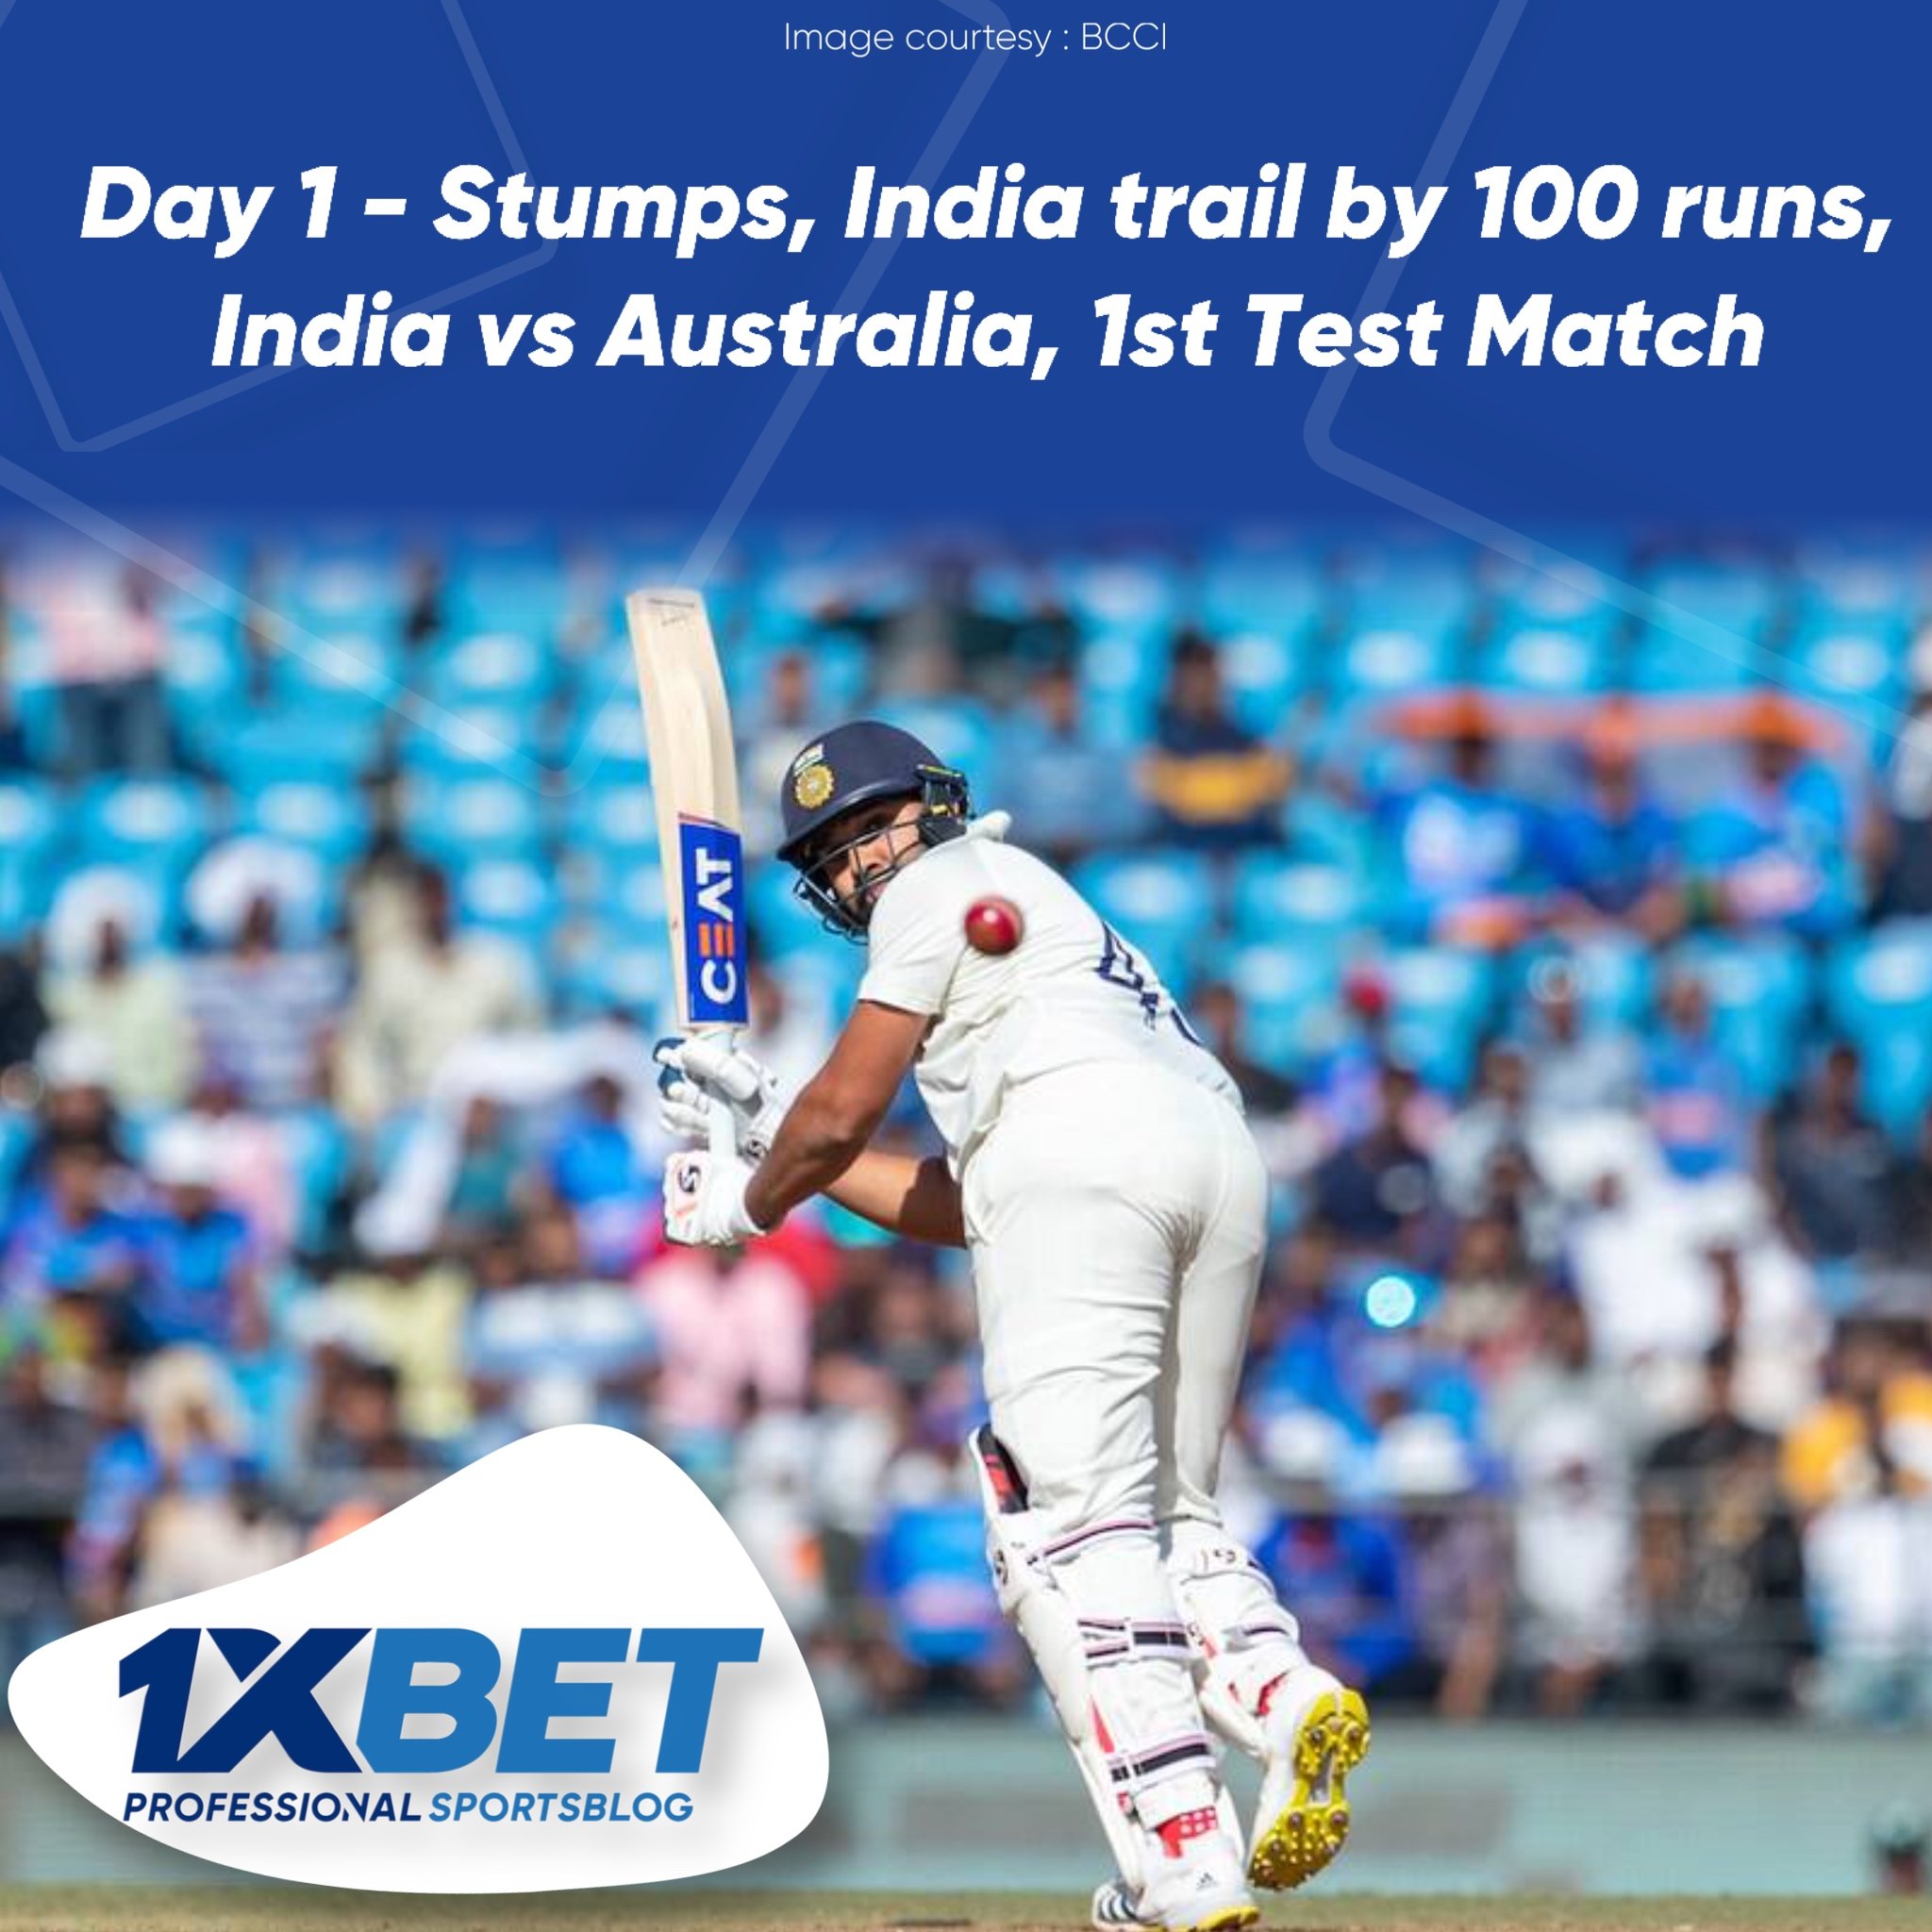 Day 1 - Stumps, India trail by 100 runs